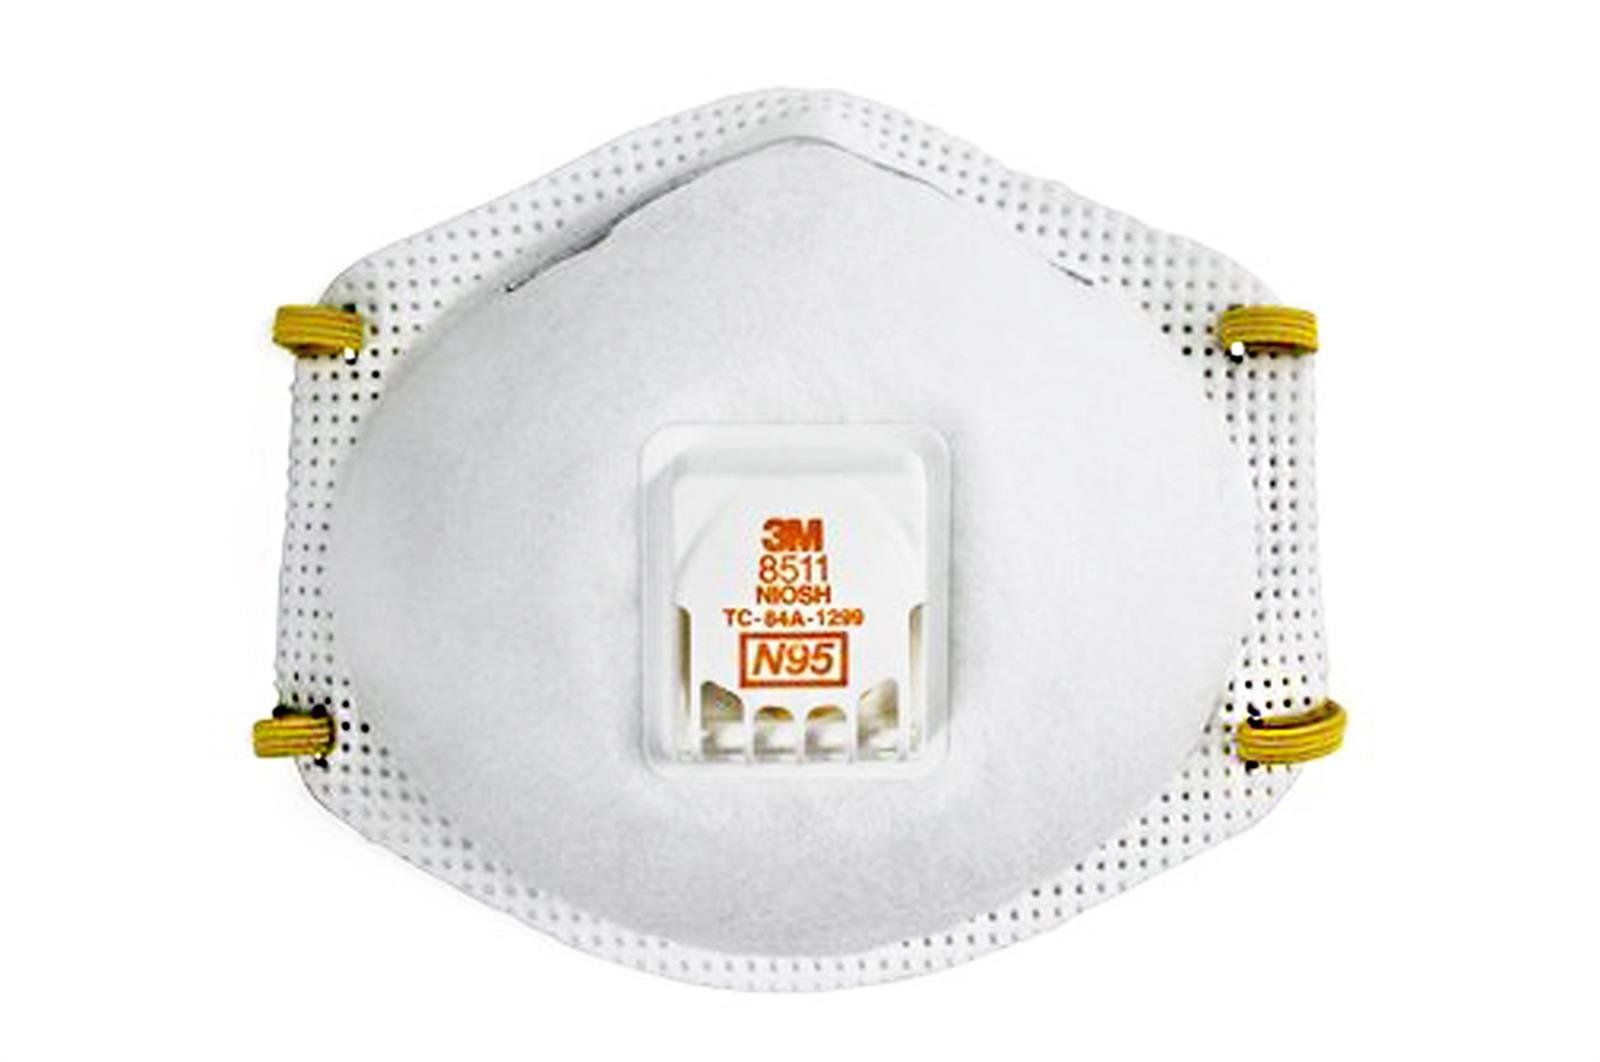 3M 8511 N95 Particulate Respirator (box of 10)